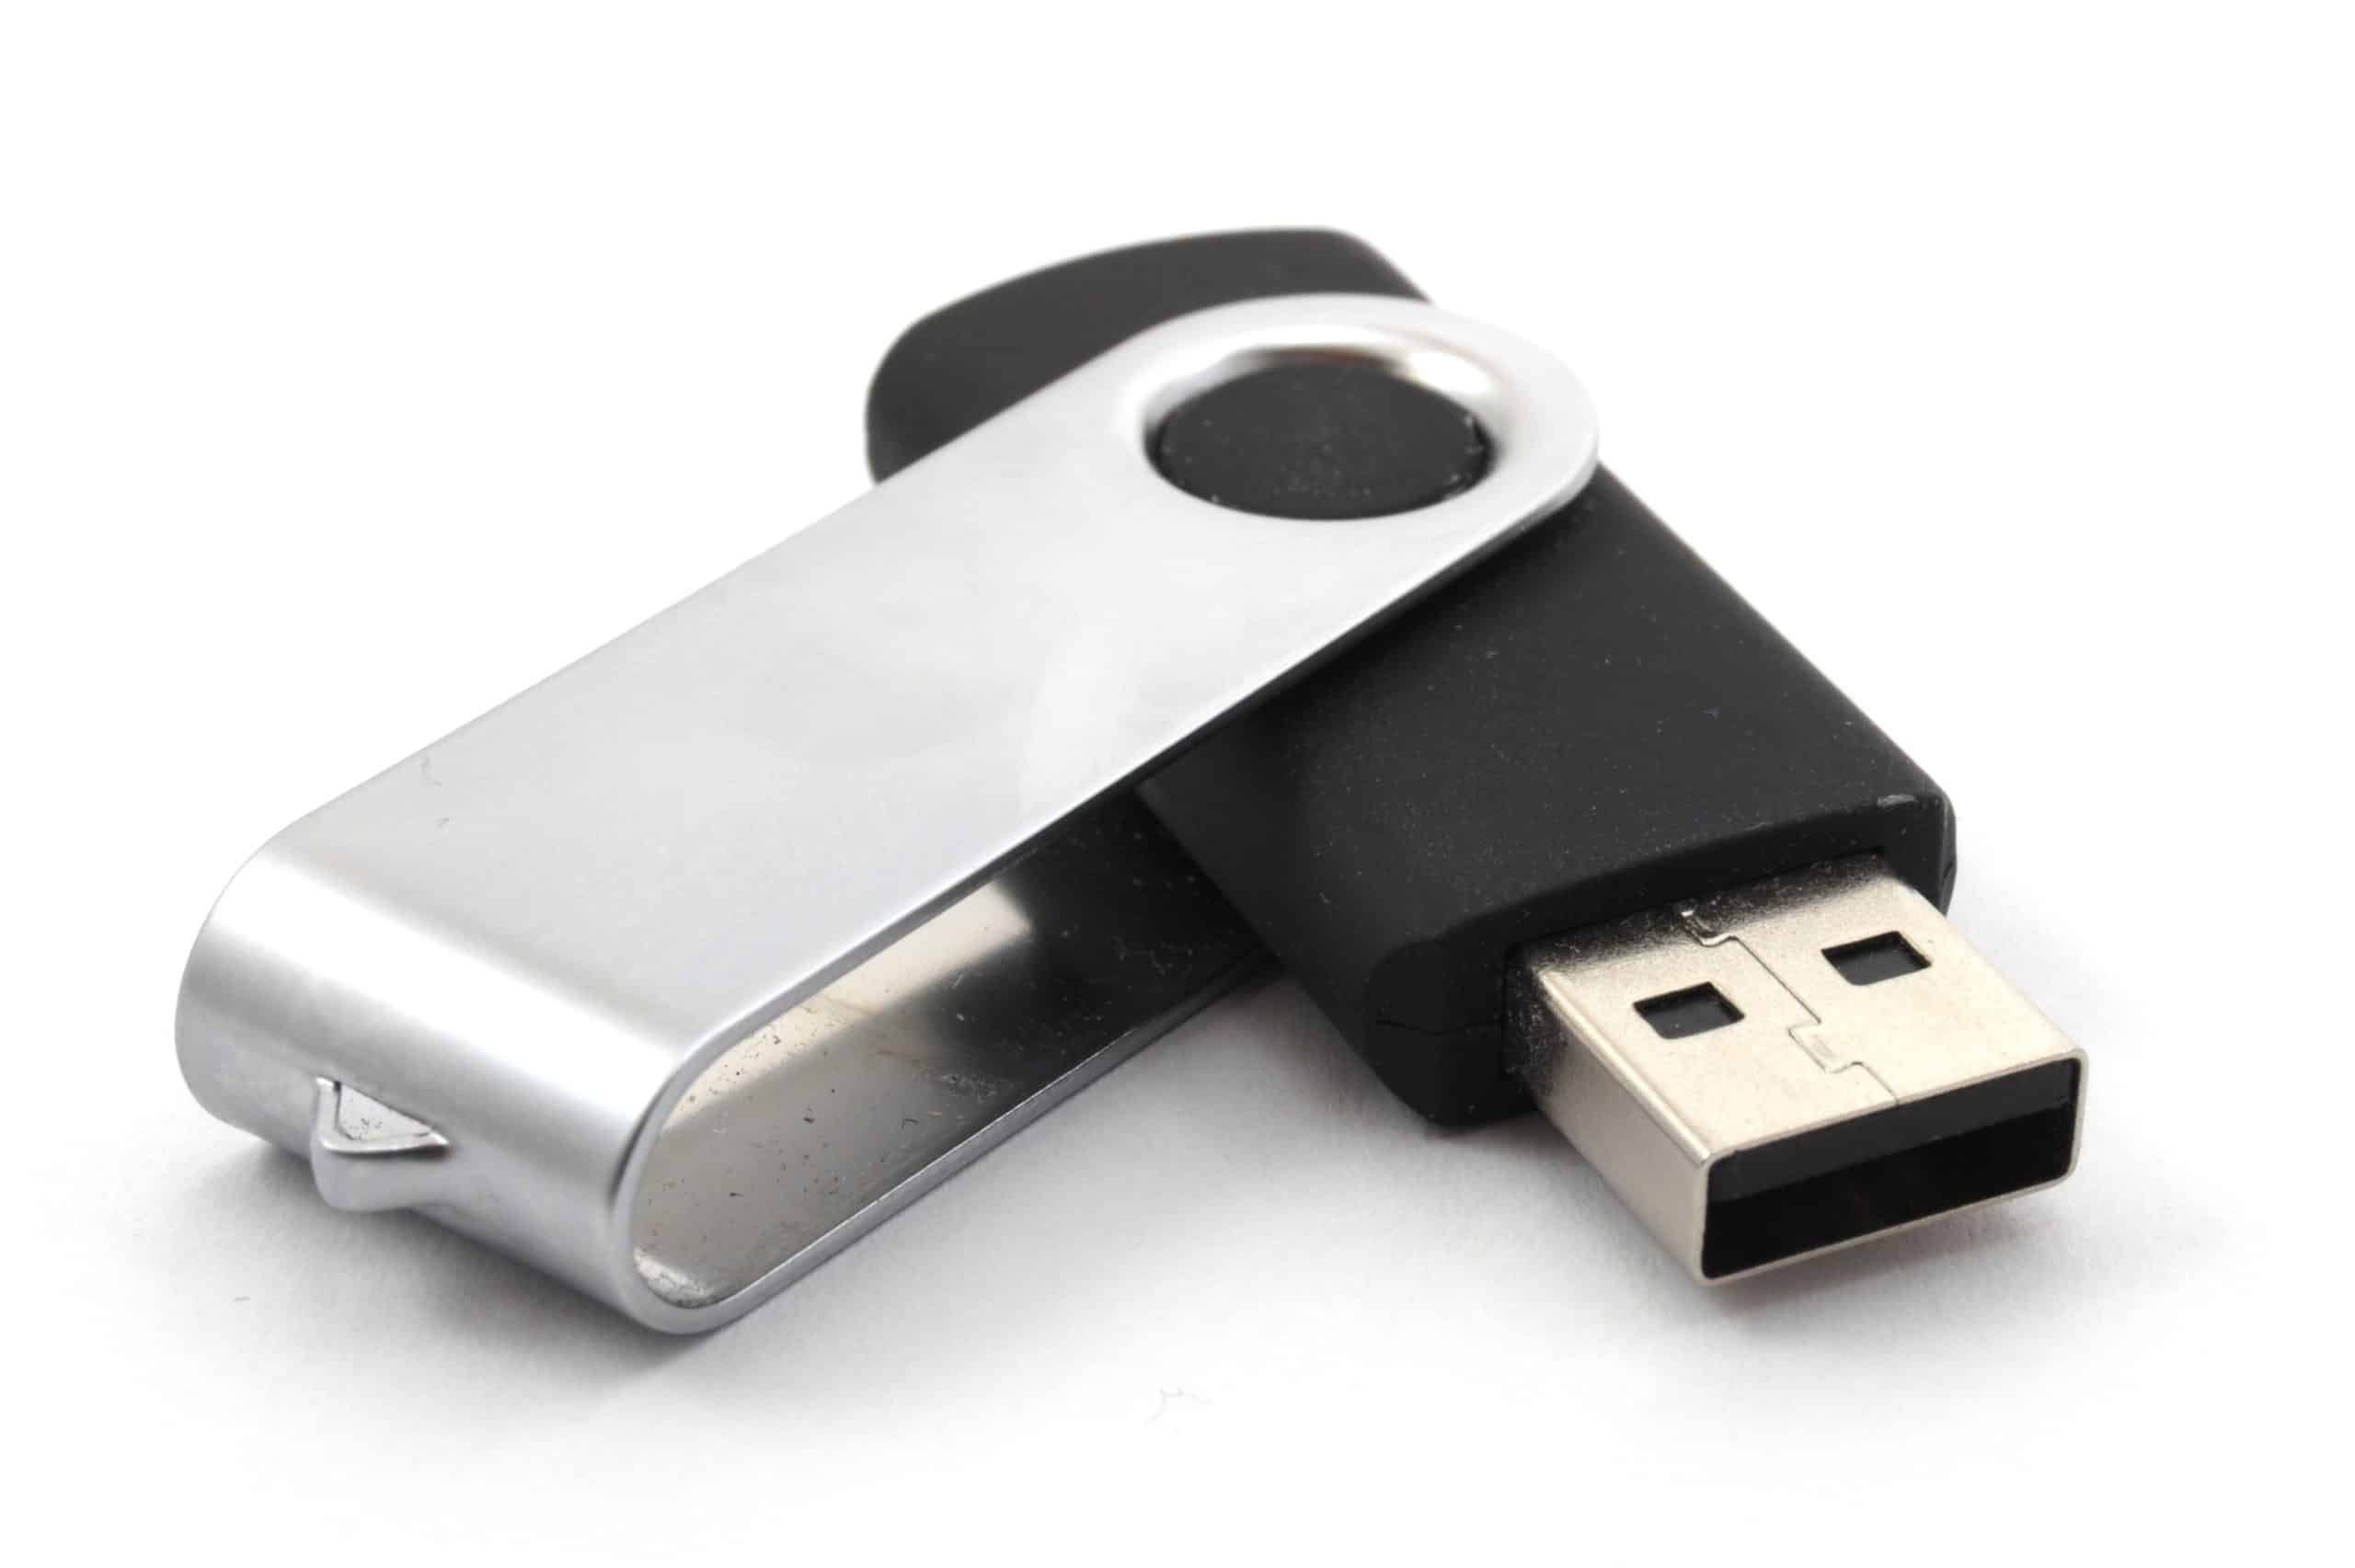 USB stick with scan images and videos